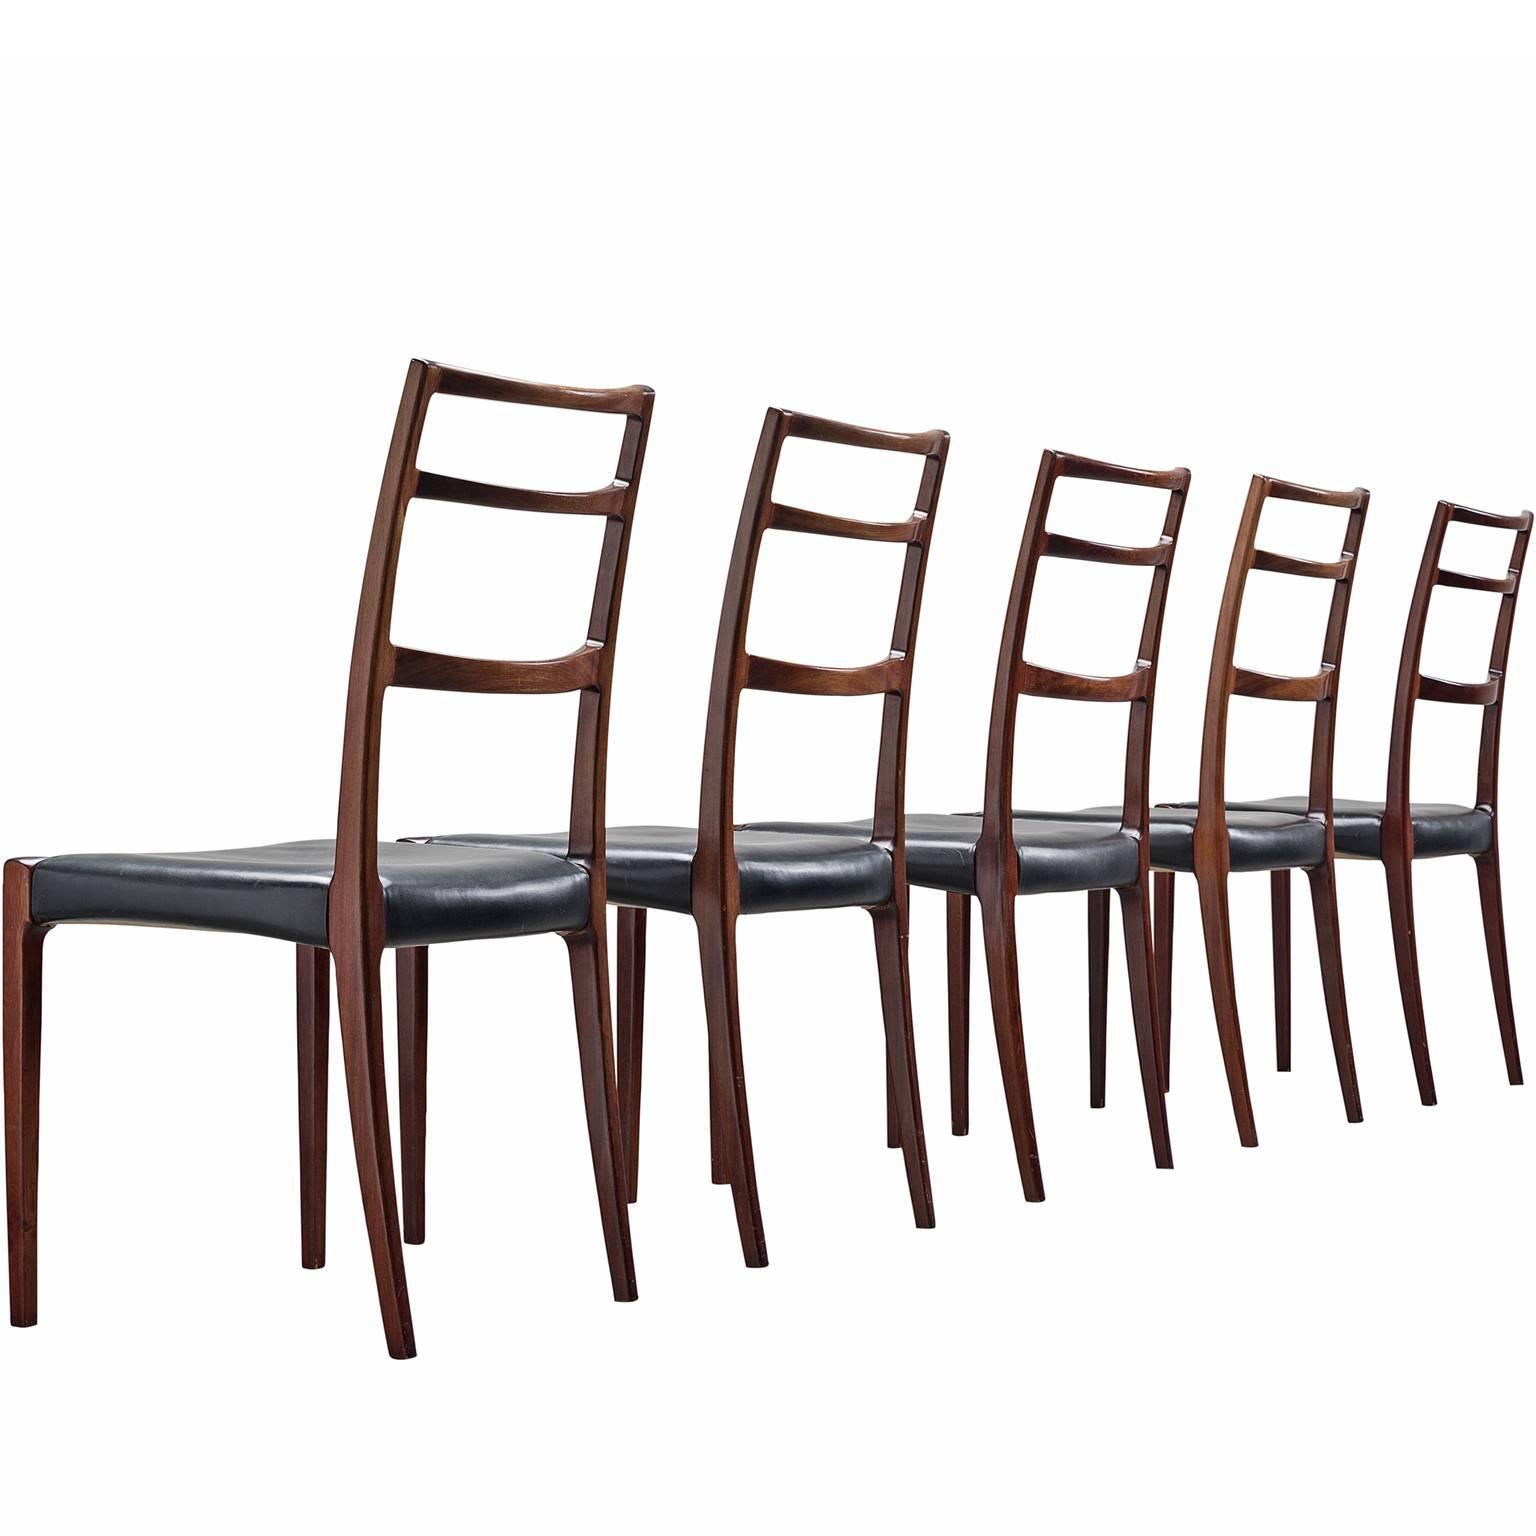 Gunni Omann Danish Dining Chairs in Black Leather and Mahogany